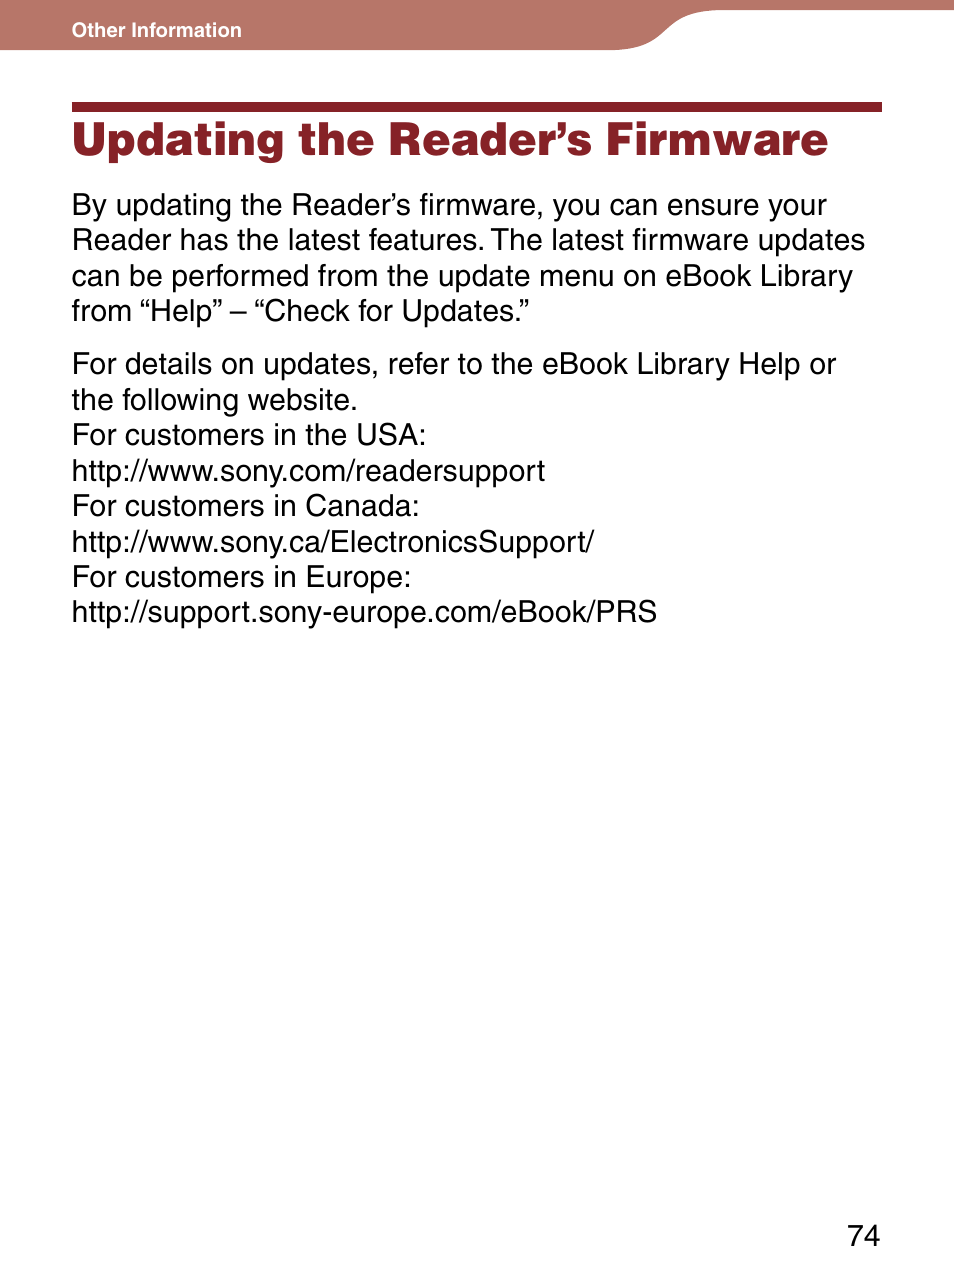 Other information, Updating the reader’s firmware | Sony PRS-300LC User Manual | Page 74 / 92